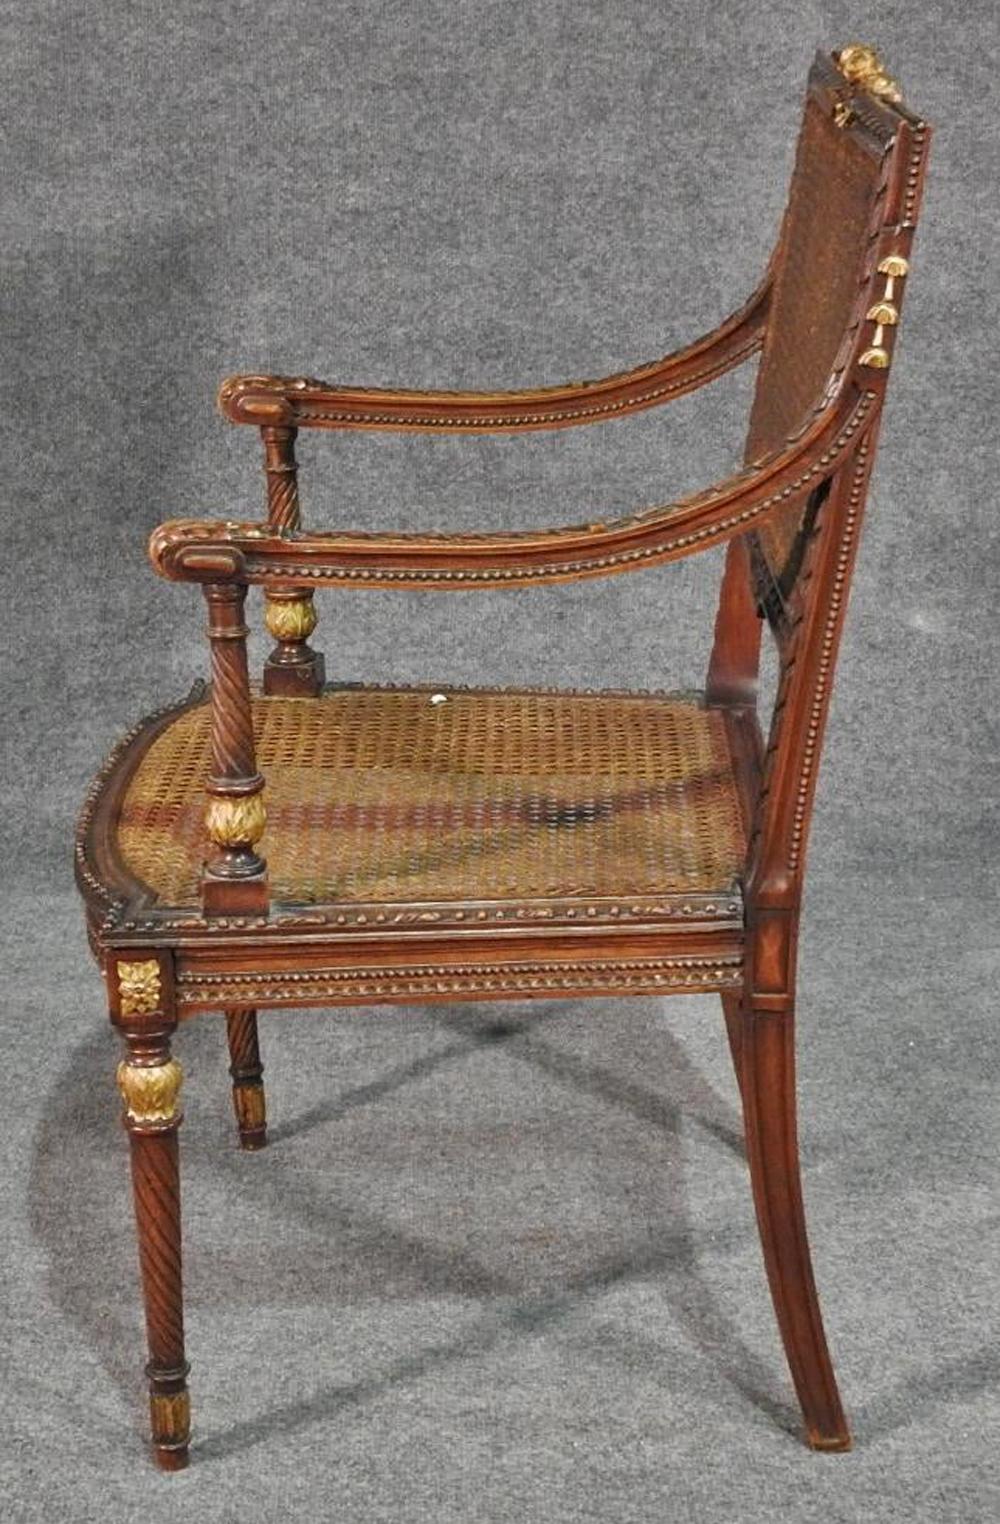 This is a fine 1870s era armchair that really is a statement piece, circa 1870. Fitted with a silk cushion with tassles, this could become your very favorite chair. The chair is in excellent condition and has normal signs of wear and age but nothing